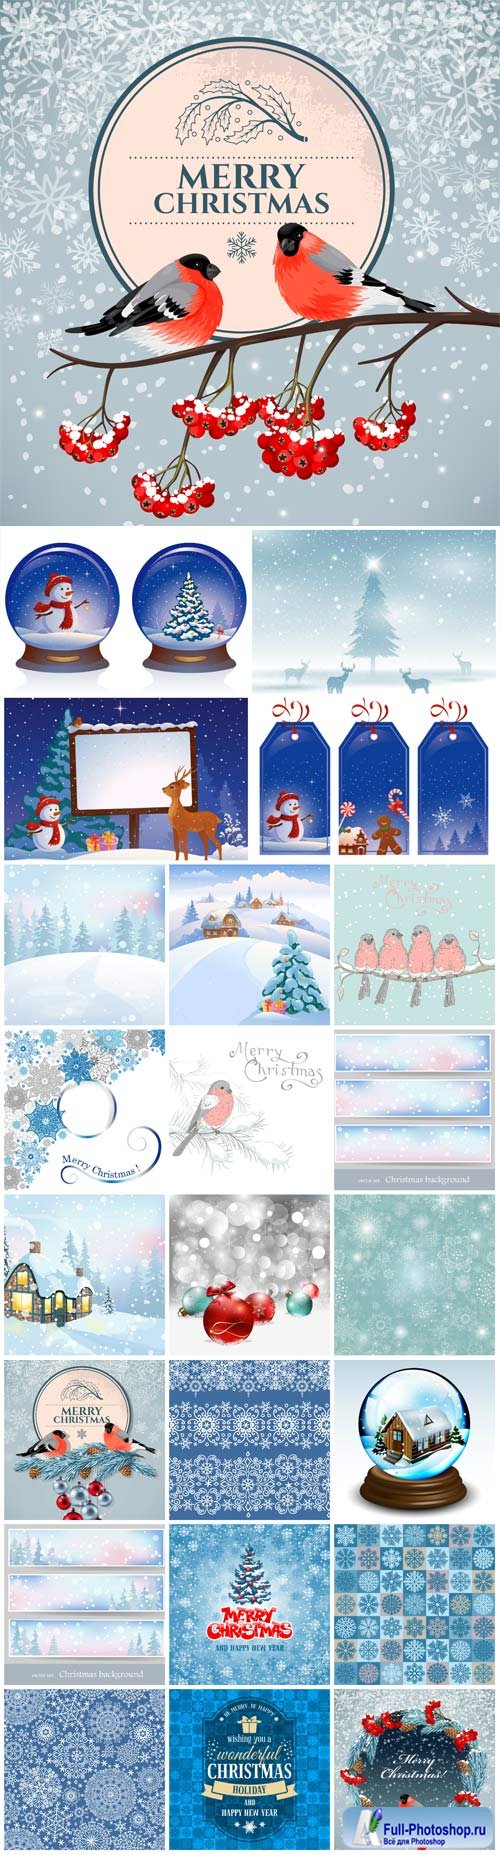 2016 Merry Christmas, new year, winter landscape, vector backgrounds